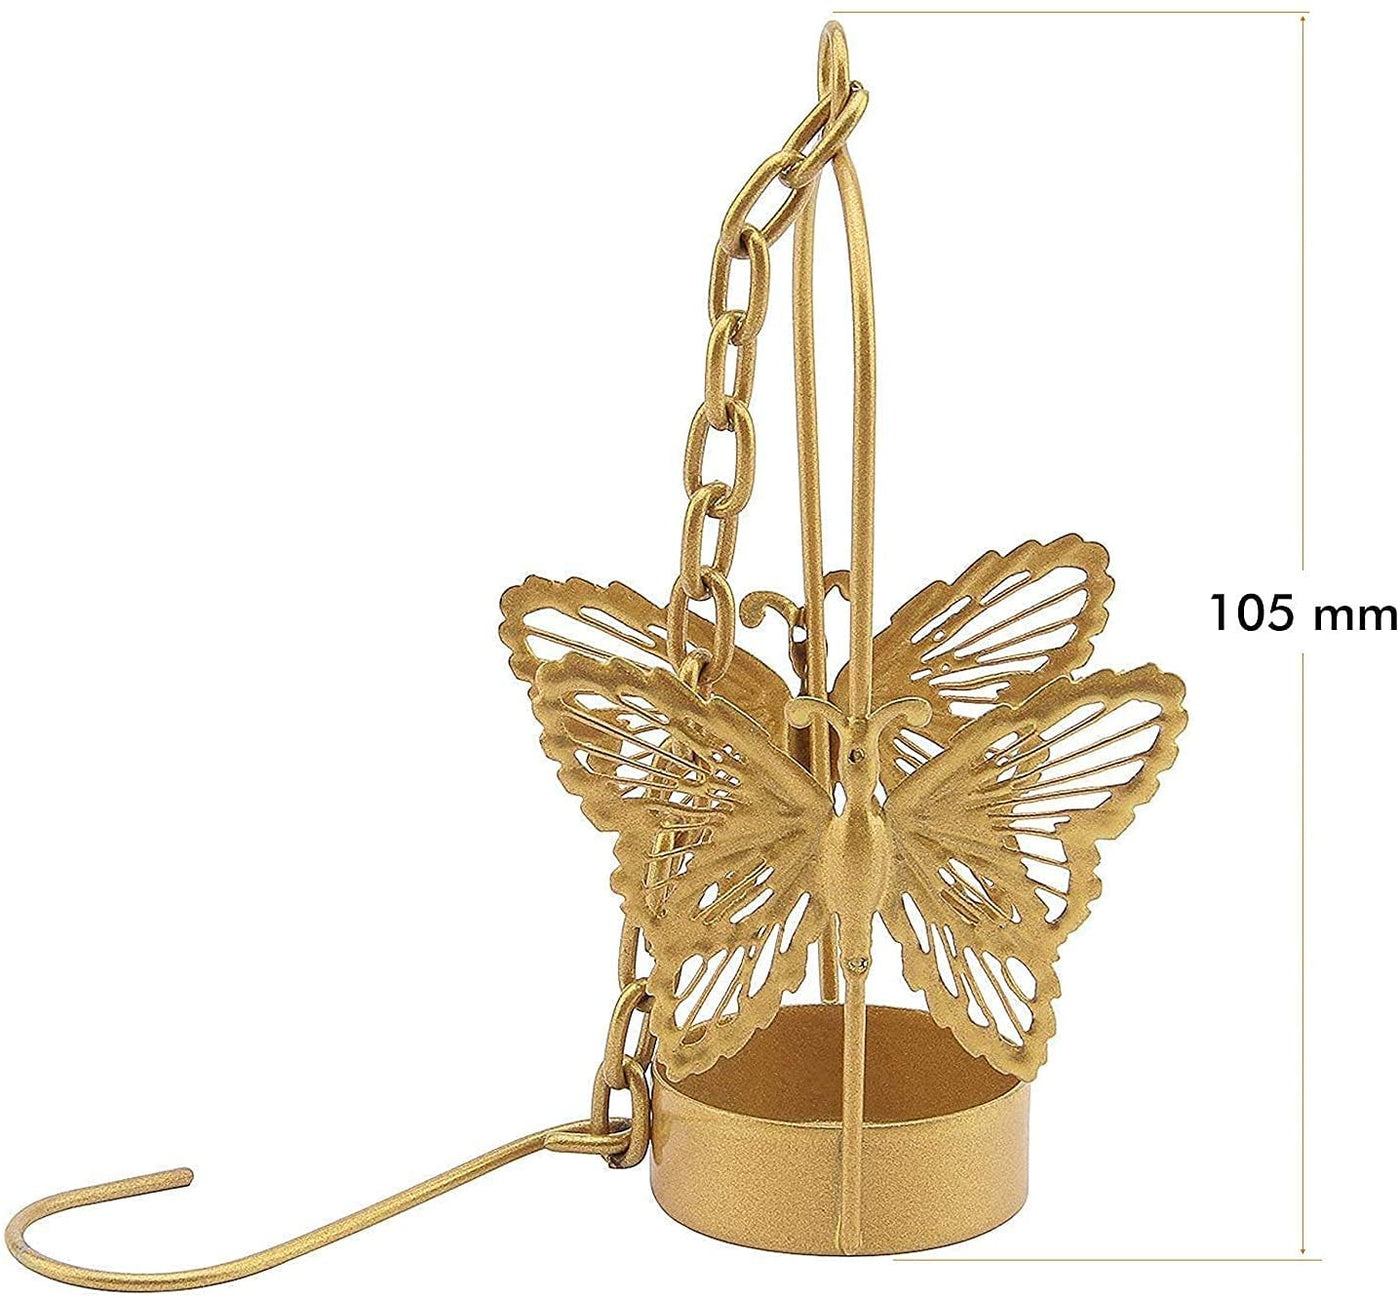 LAMANSH Gold / Metal / 10 LAMANSH® ( Pack of 10 ) Festive Decorative Hanging Butterfly Tealight Candle Holder for Home Decor with Chain Hangs for Diwali, Christmas Home and Party Decorations